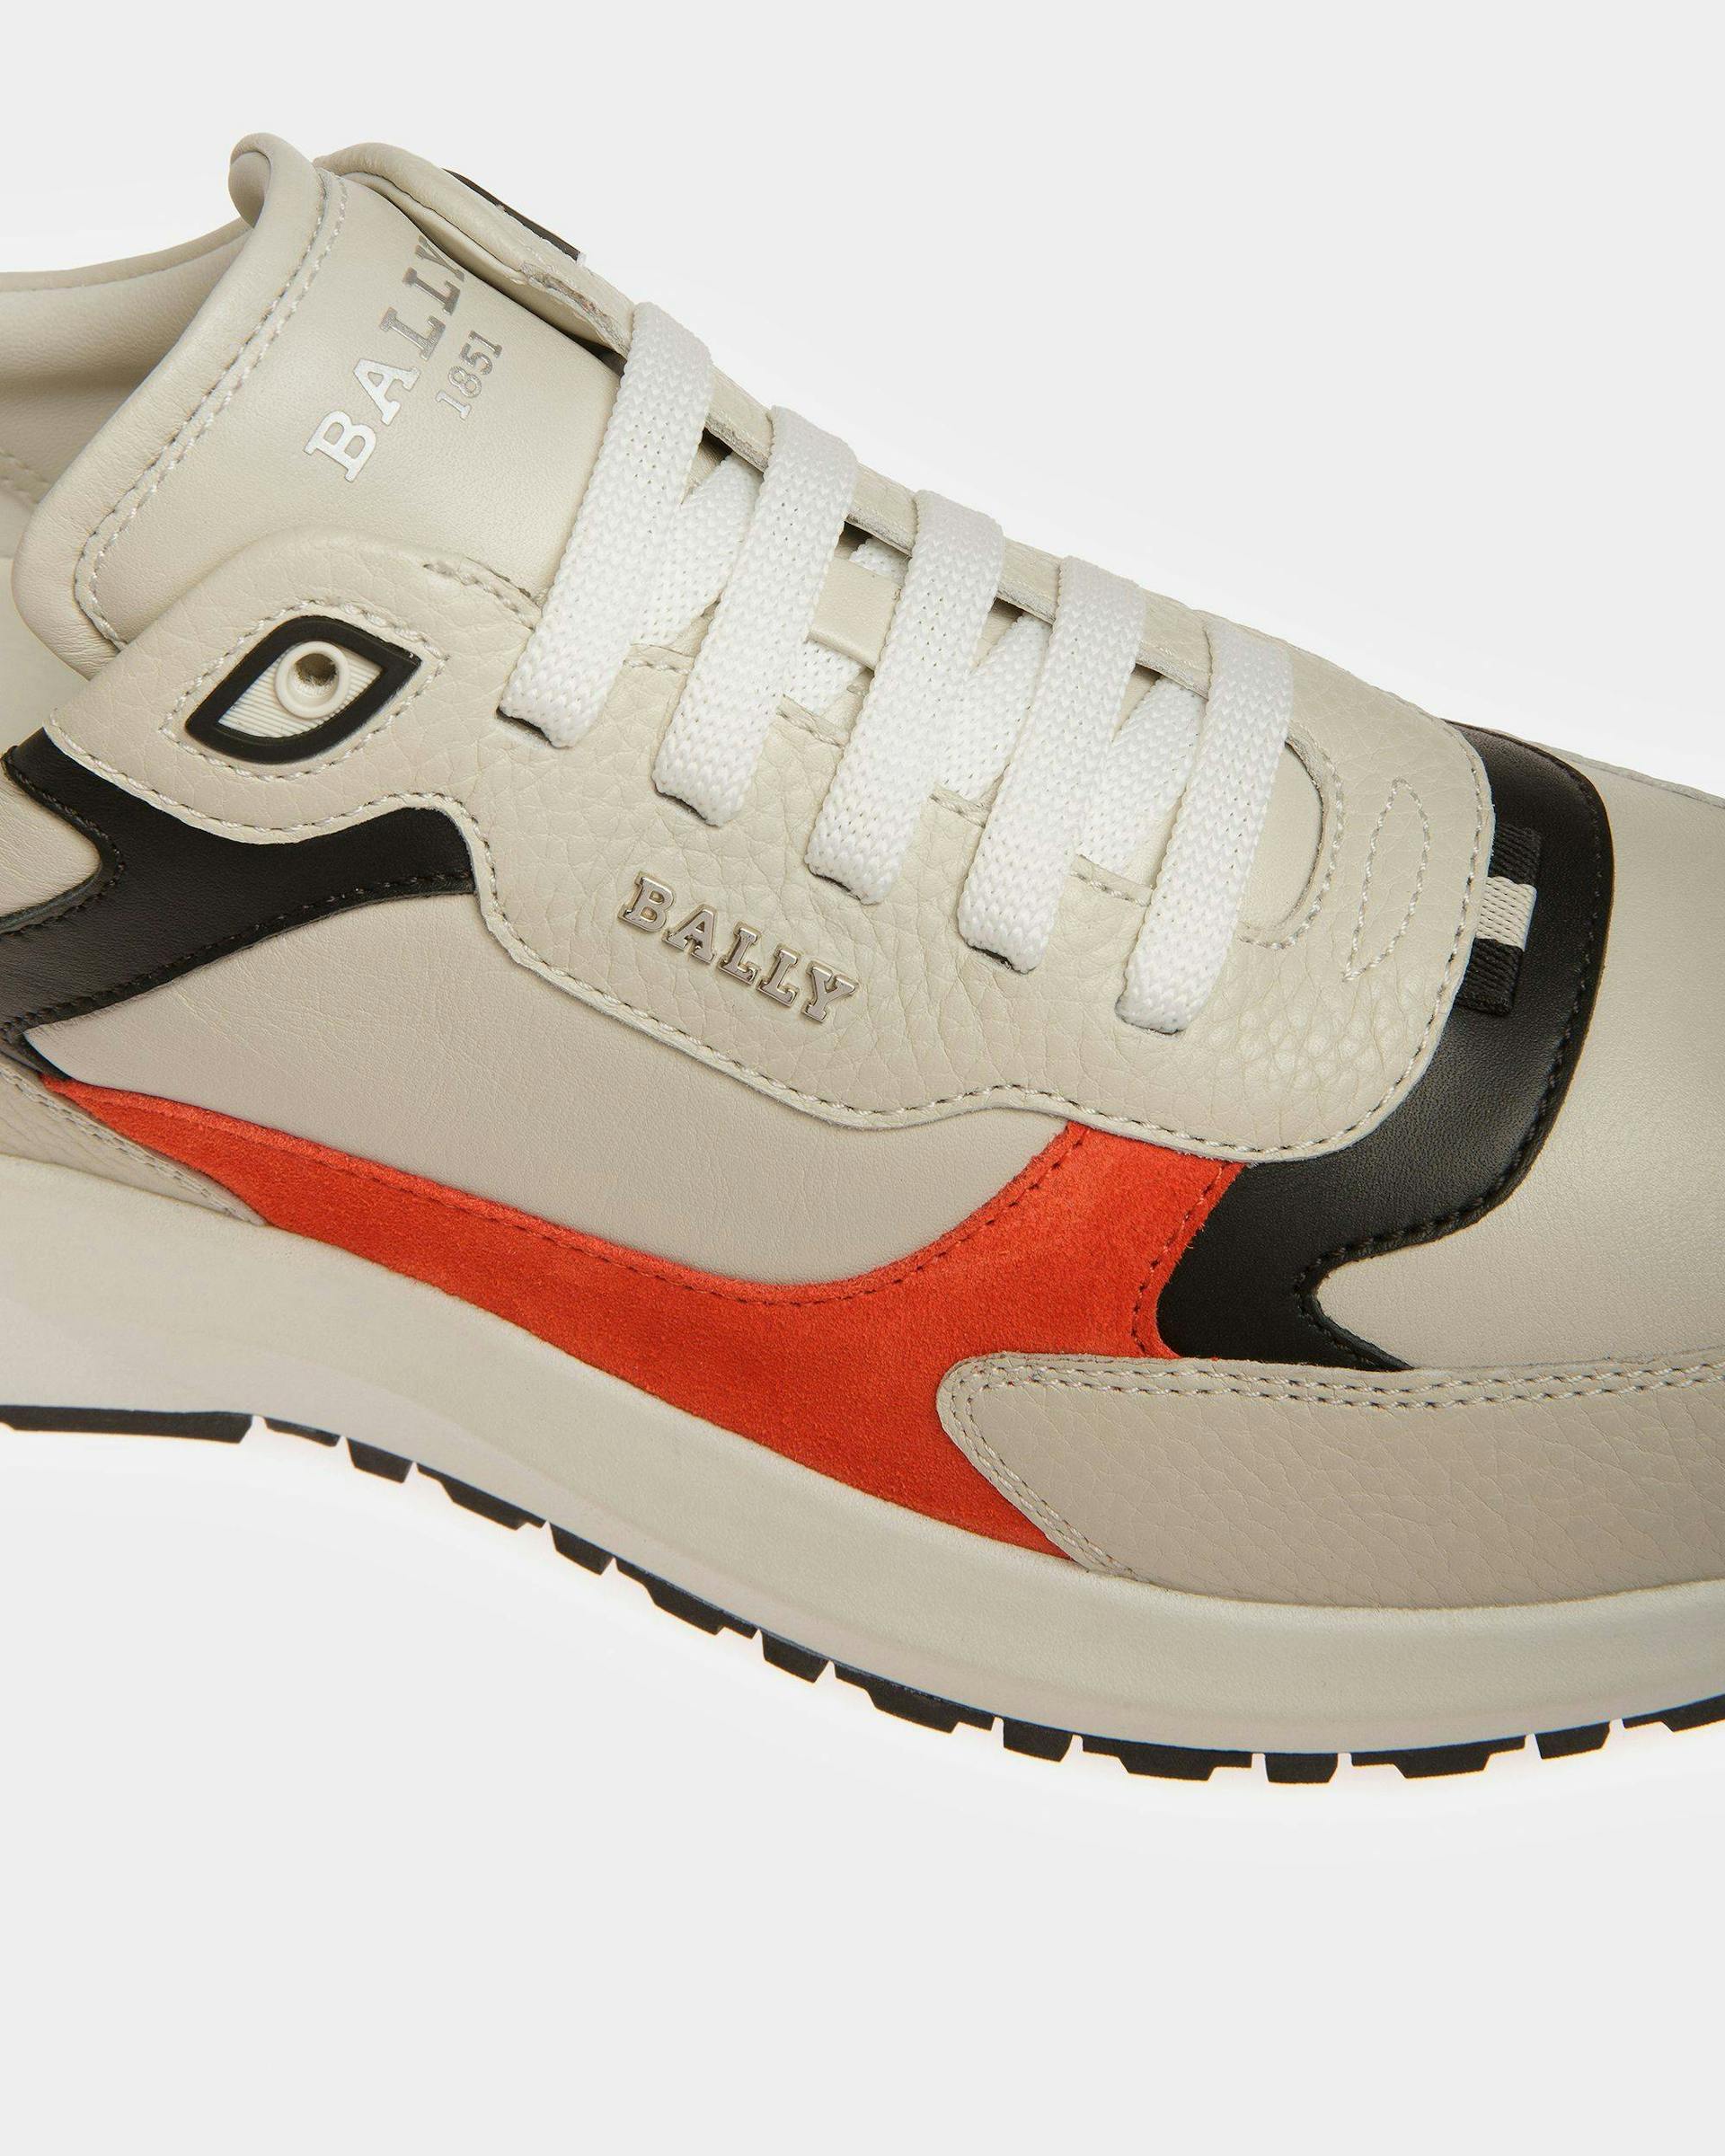 Dave Leather And Fabric Sneakers In Dusty White And Orange - Men's - Bally - 05